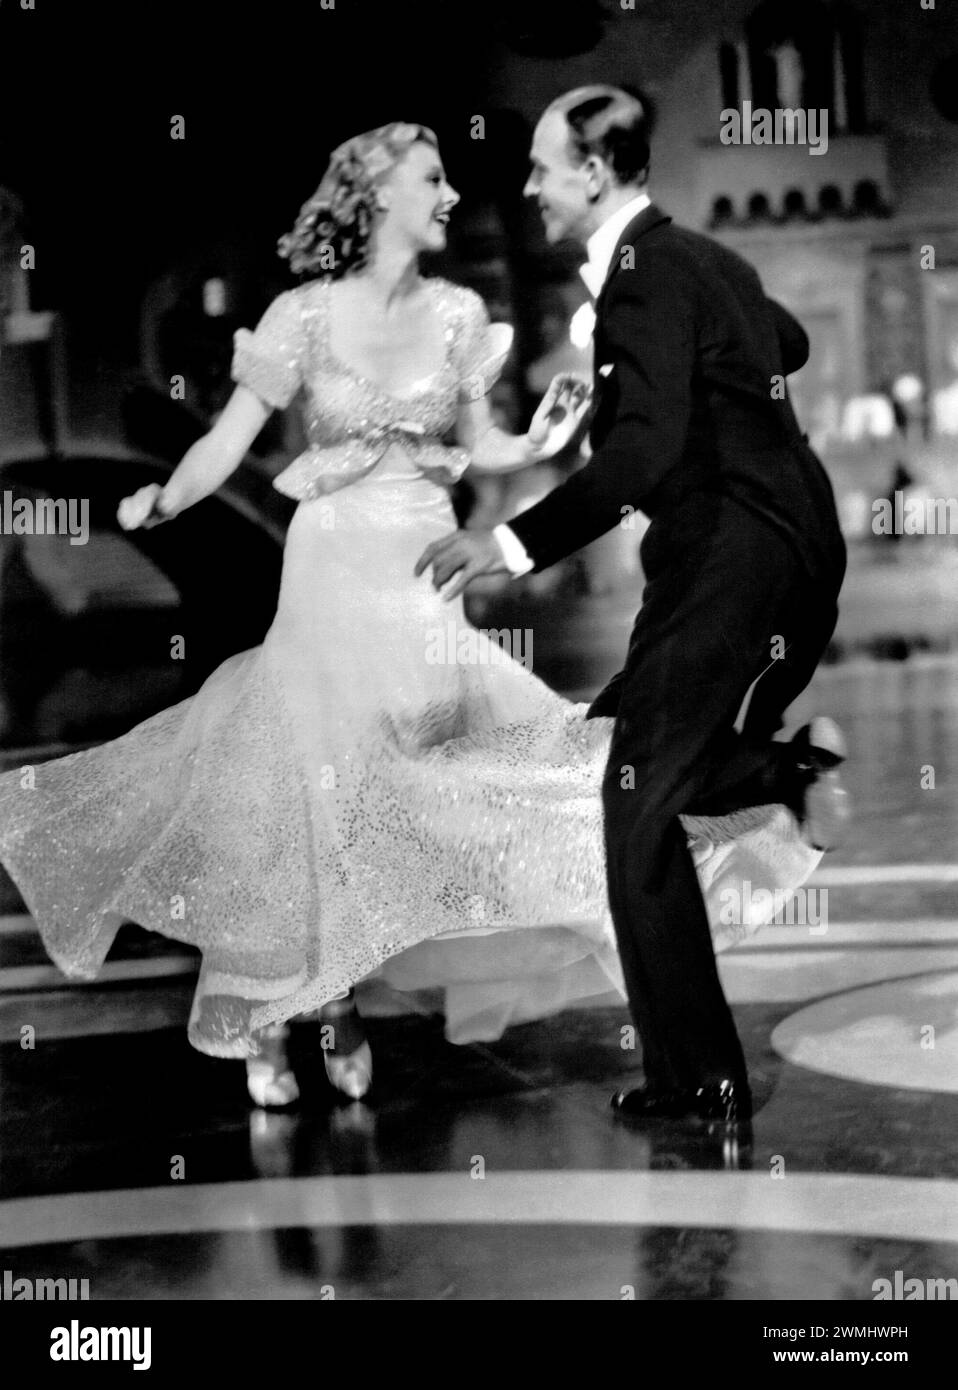 Fred Astaire e Ginger Rogers. Fred Astaire (Frederick Austerlitz;1899-1987) e Ginger Rogers (Virginia Katherine McMath; 1911-1995) in una foto promozionale per Top Hat, 1935 Foto Stock